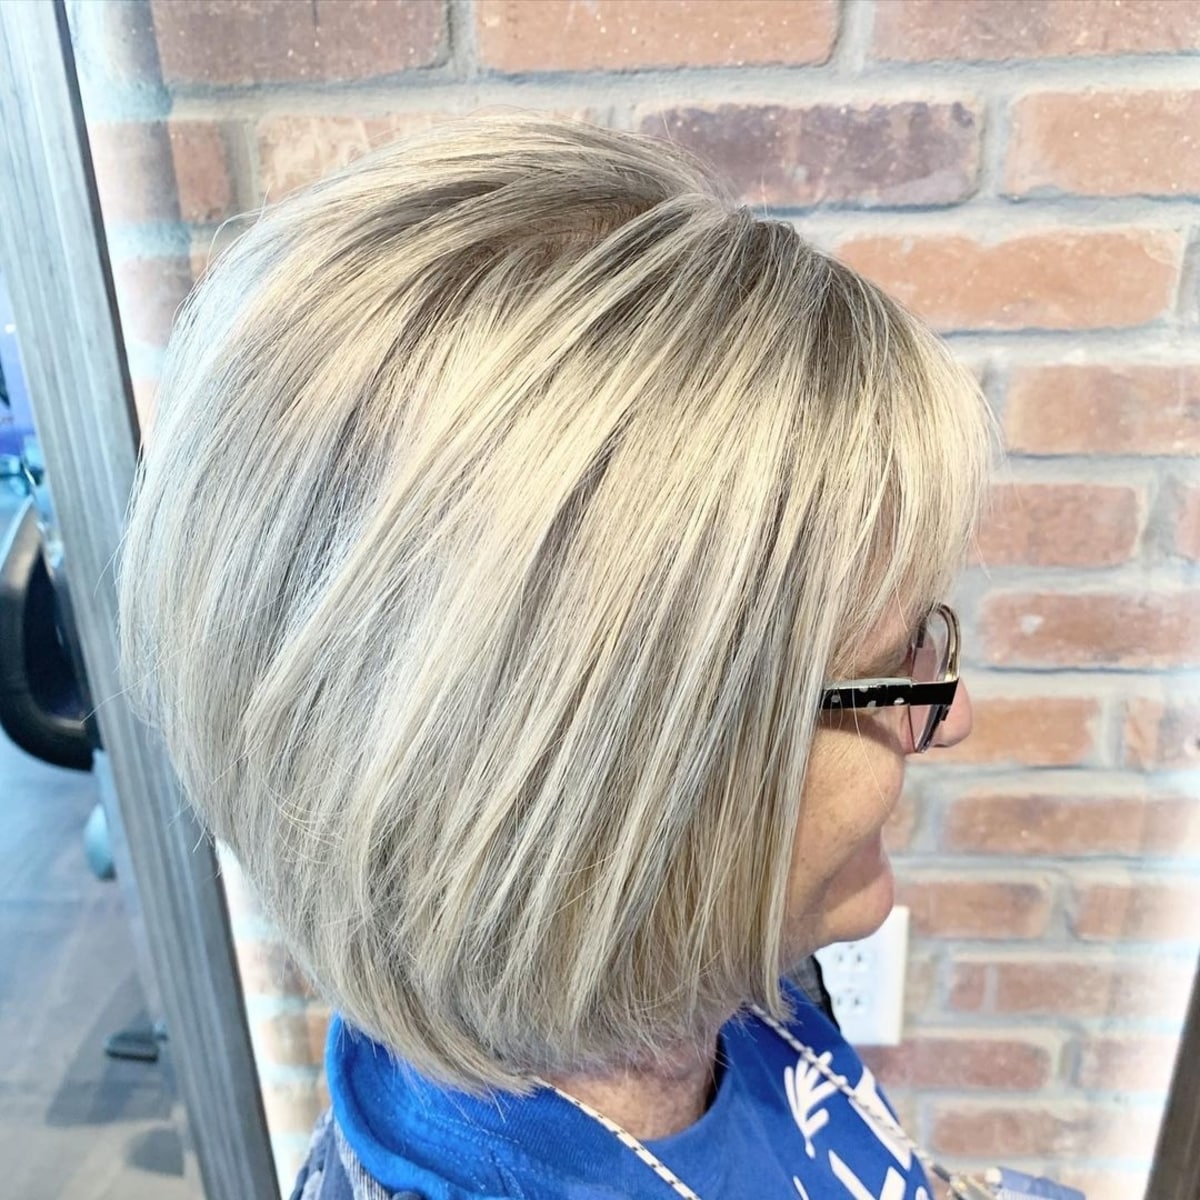 Long stacked bob haircut for women over 50